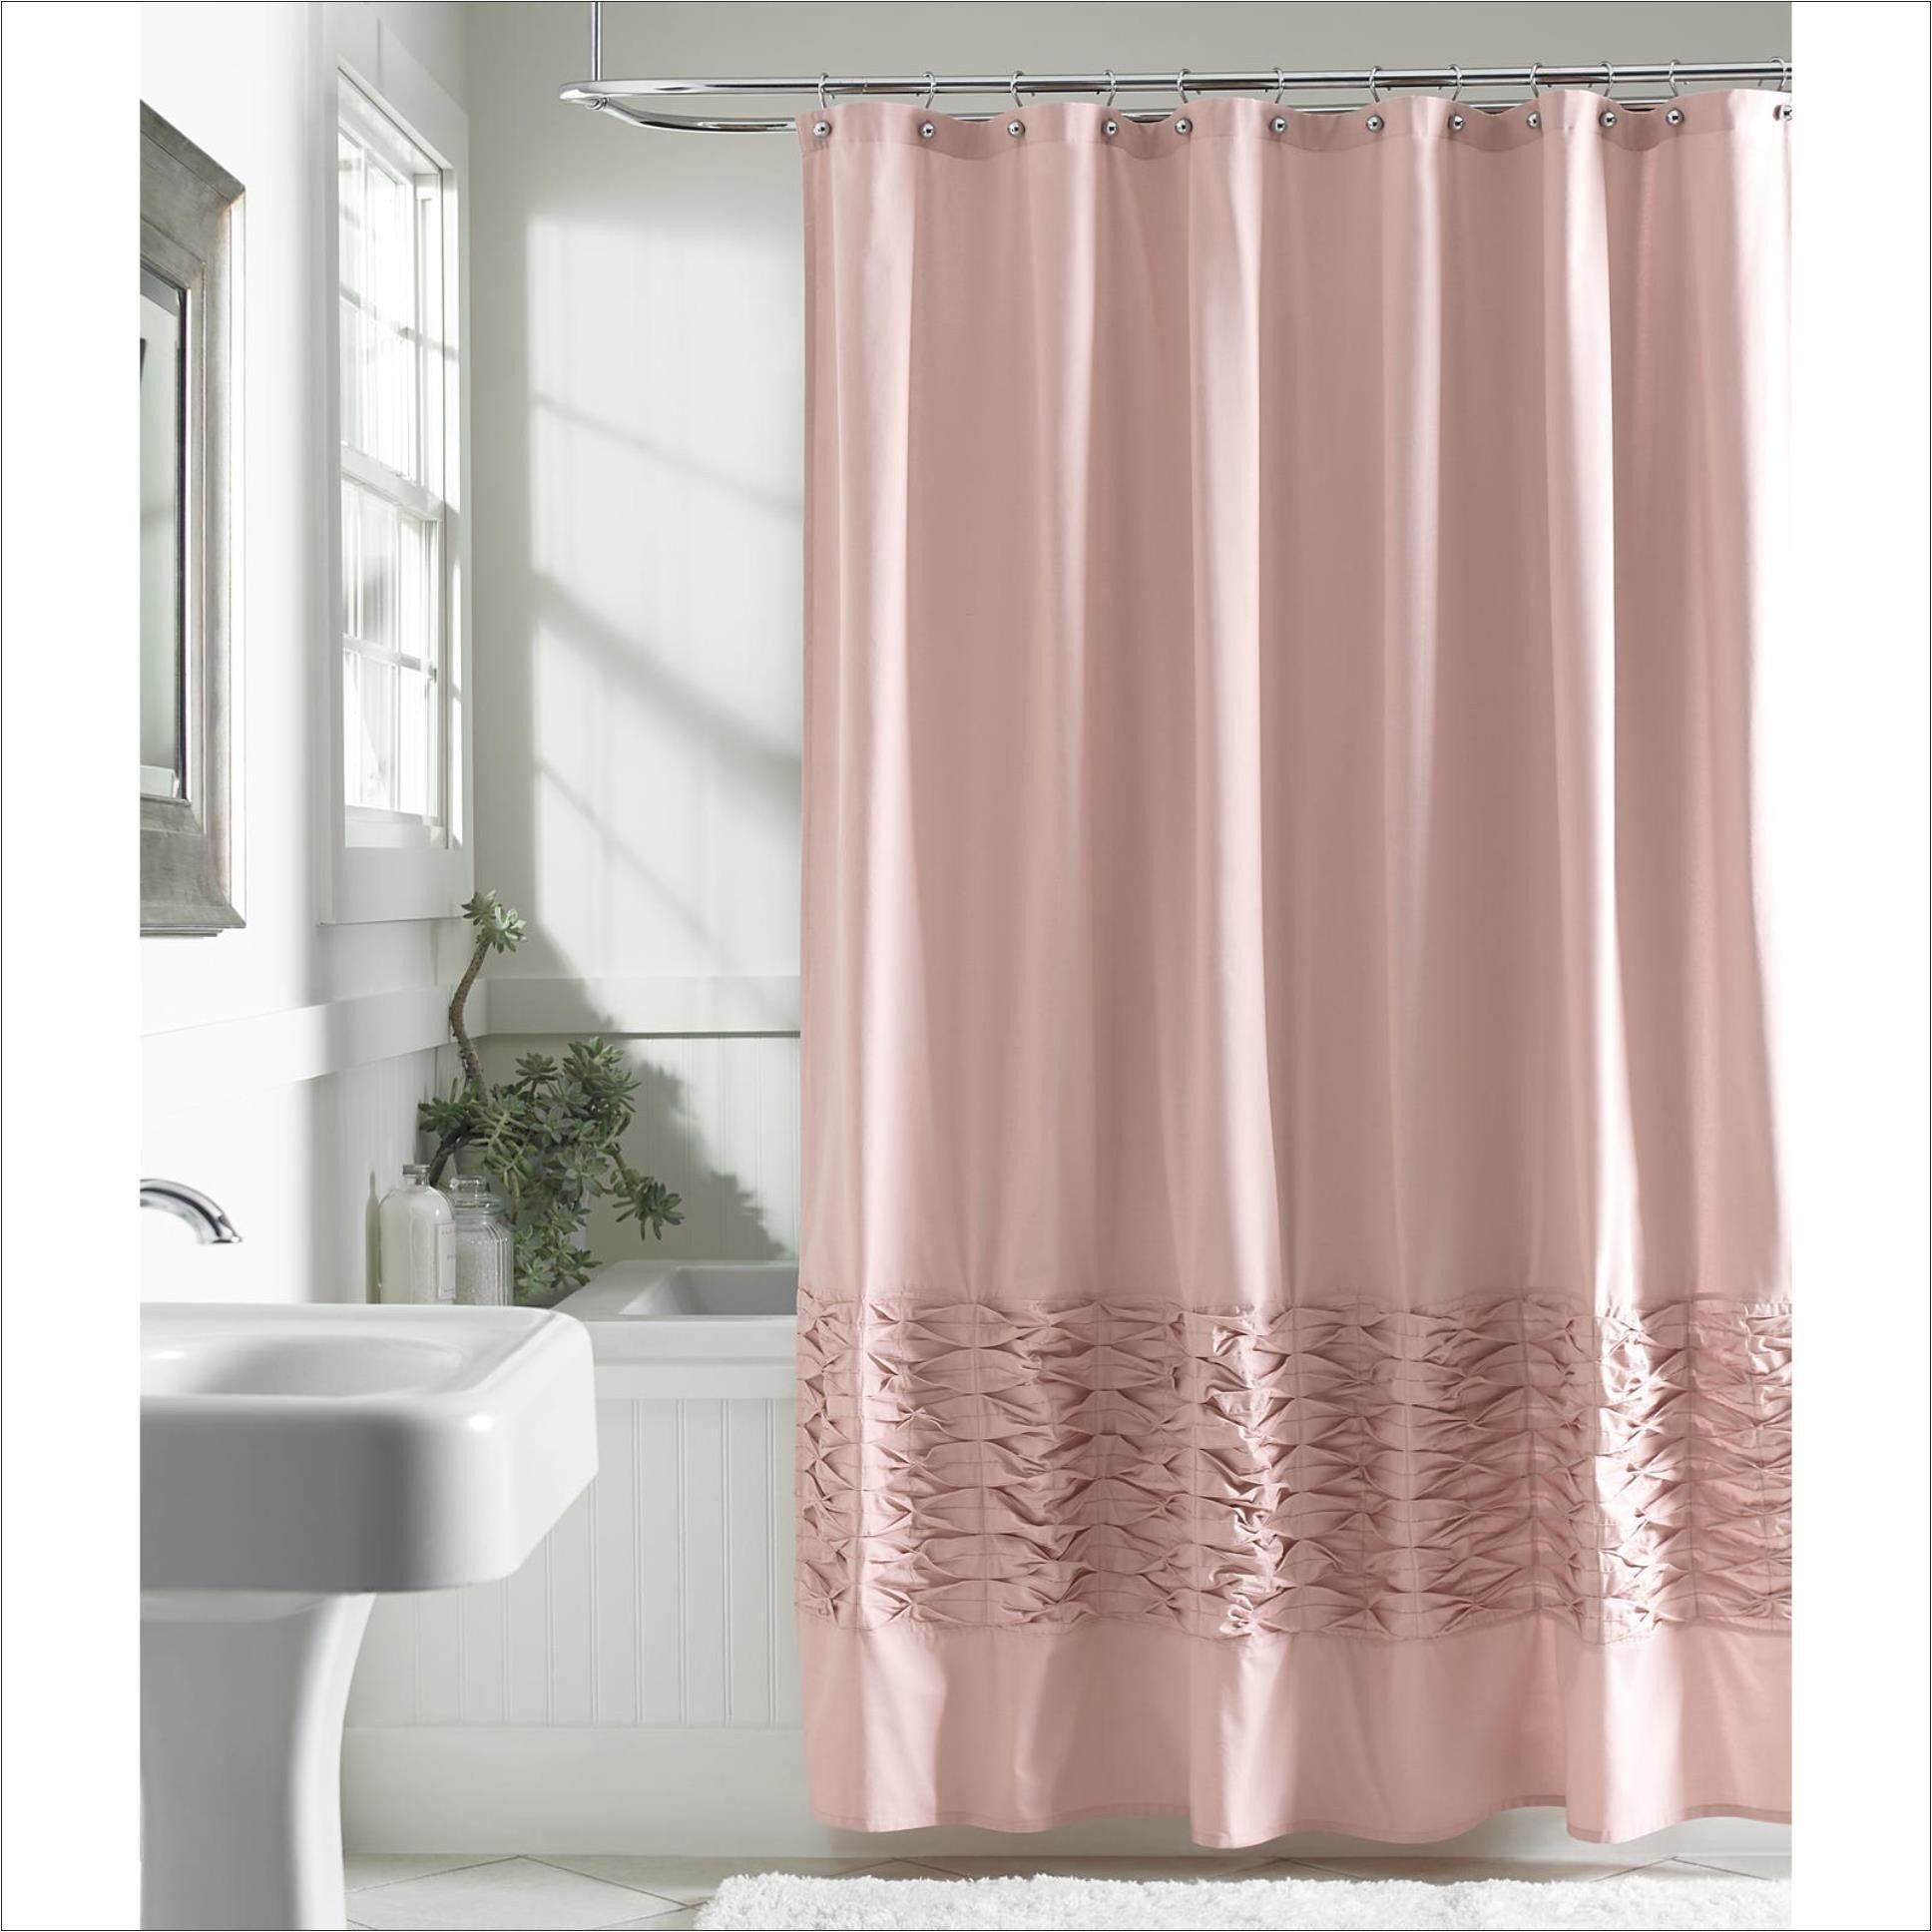 full size of furniture canvas curtains fresh furniture elegant plum drapes plum drapes 0d size